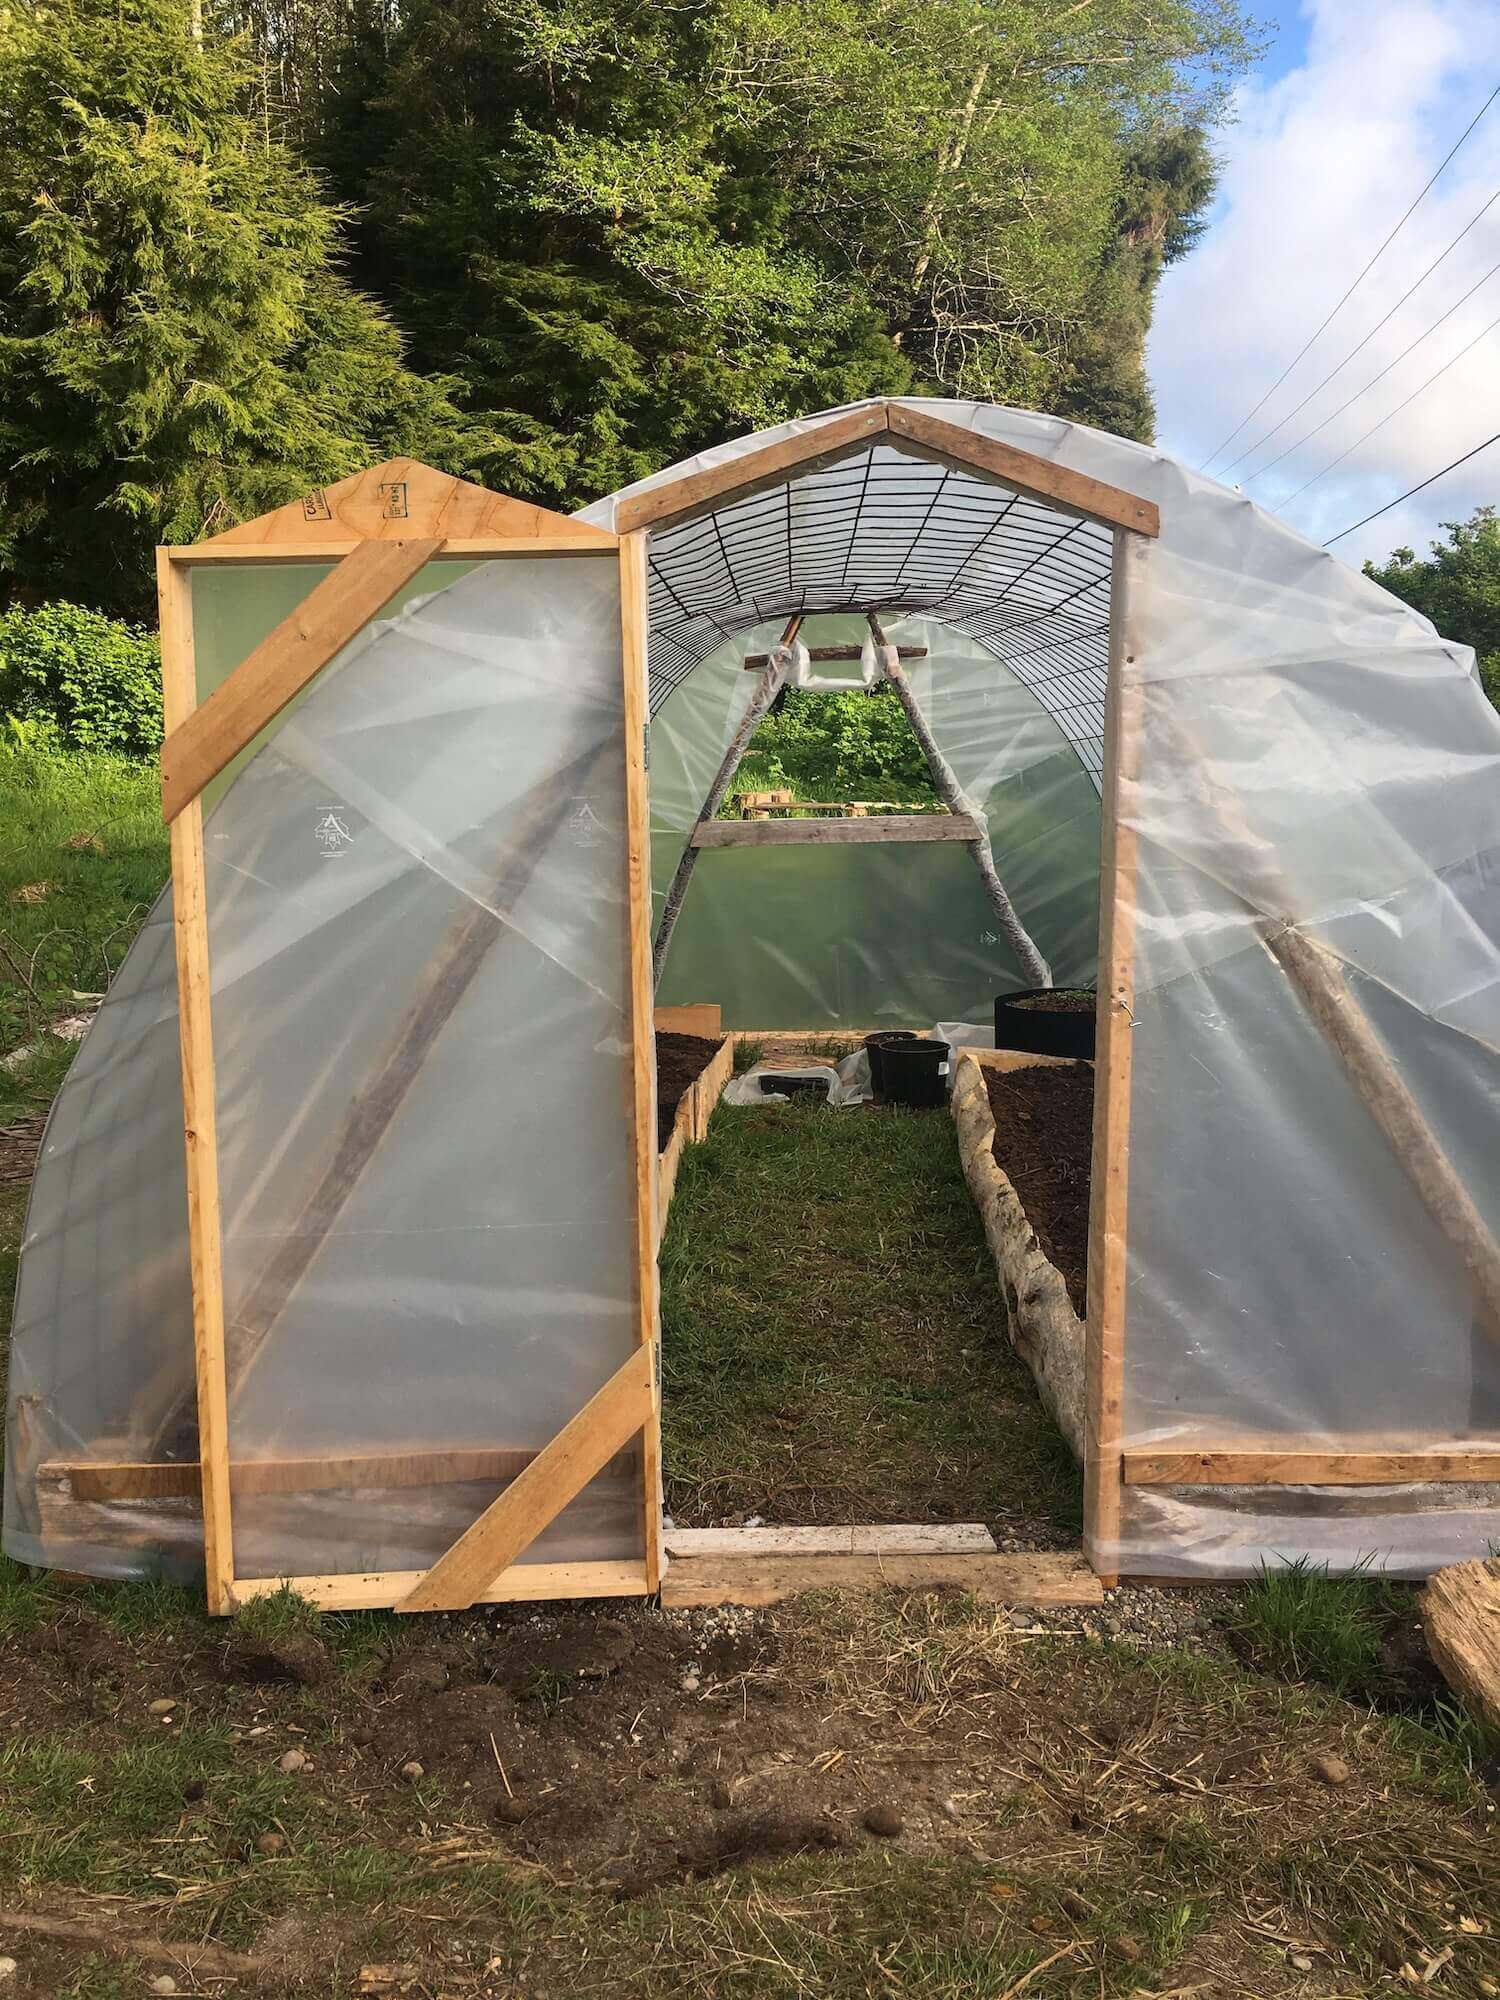 The finished greenhouse